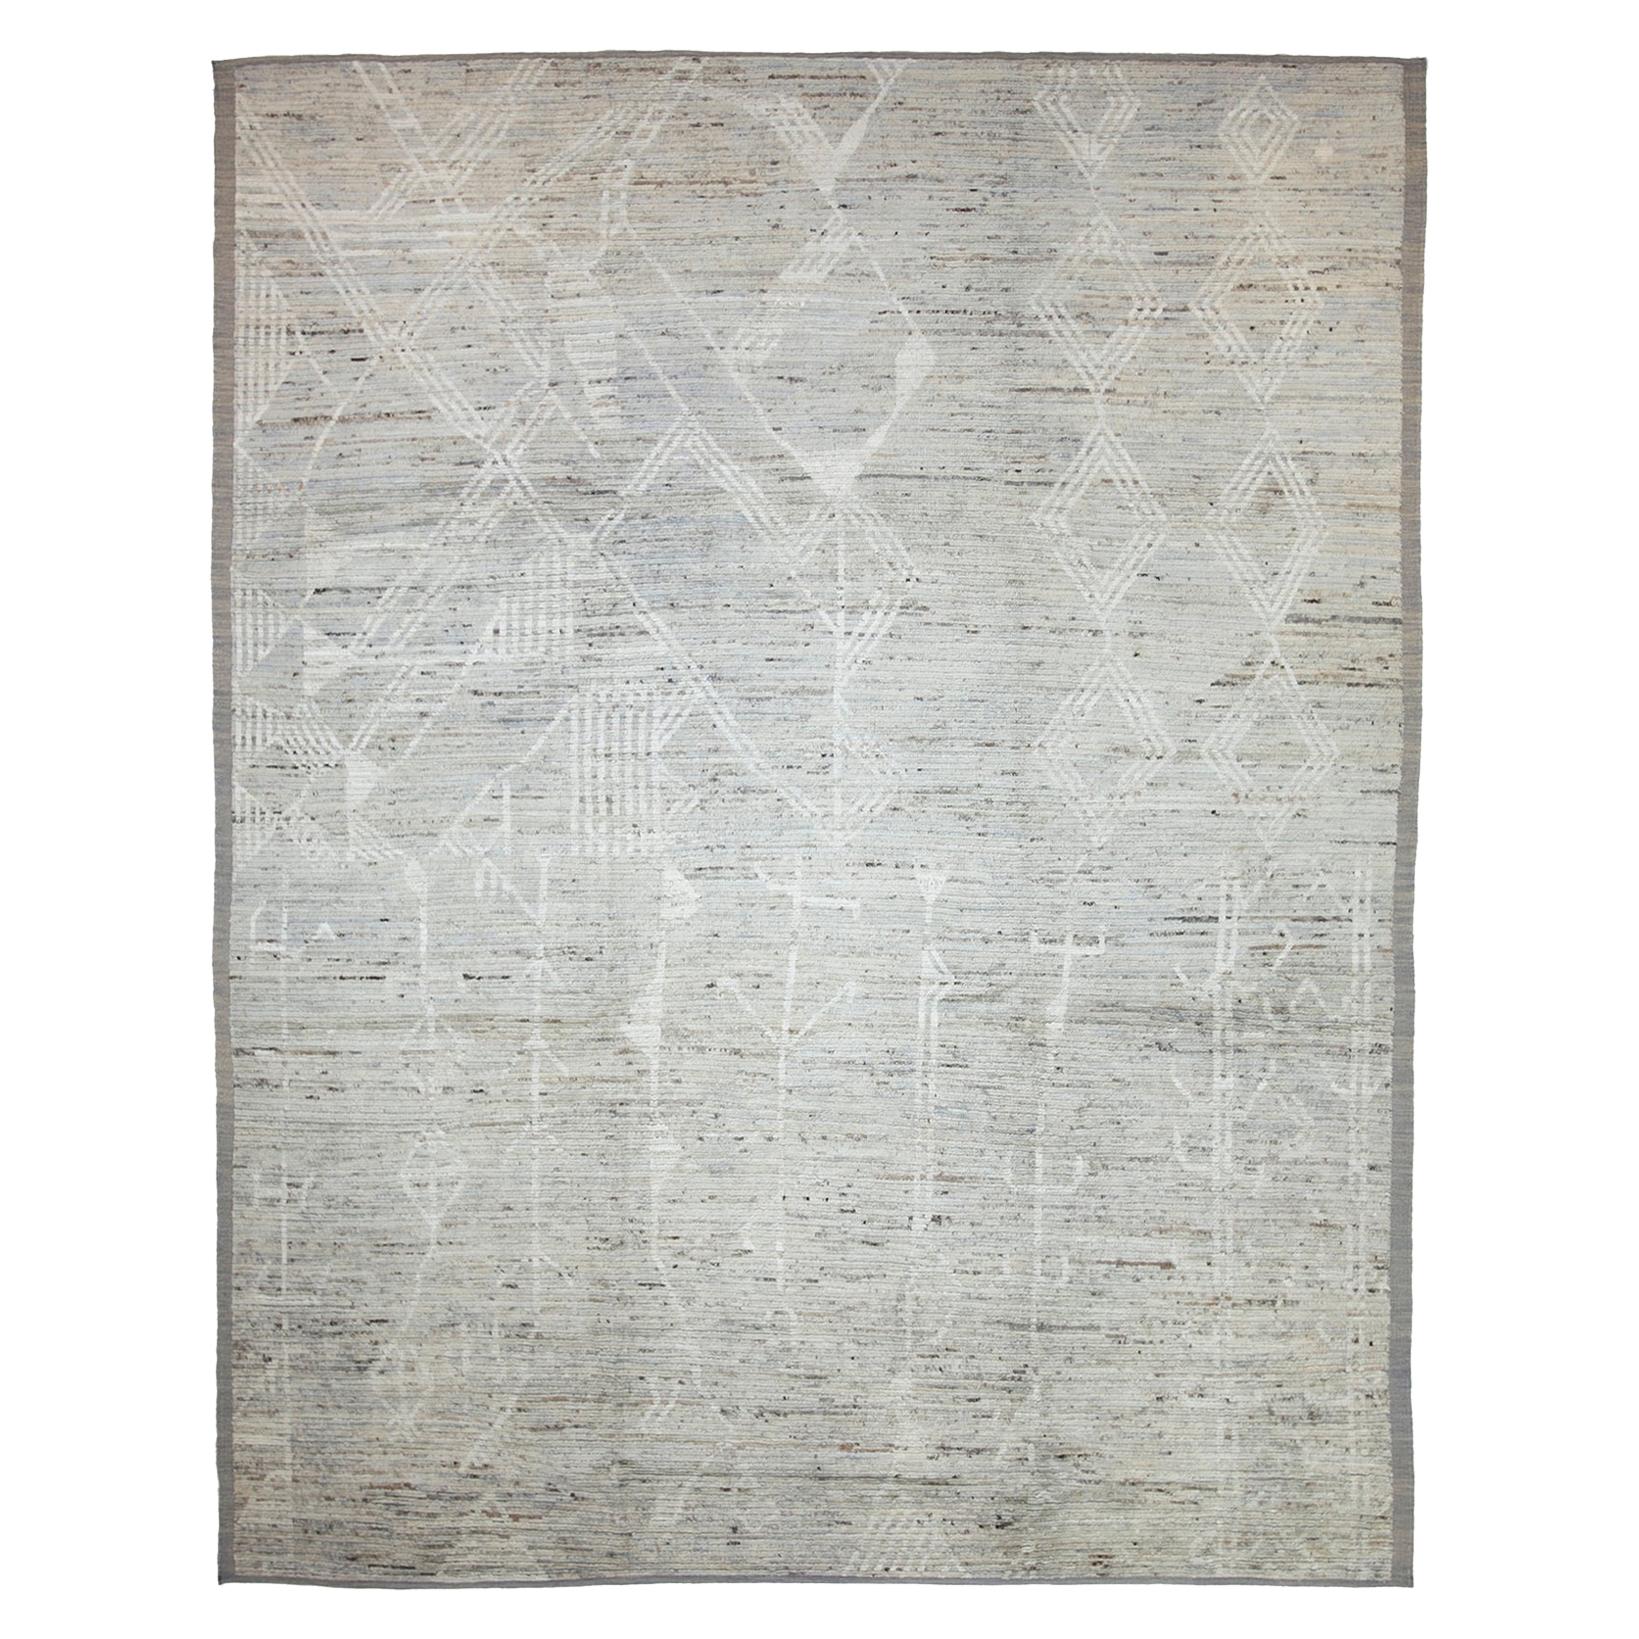 Nazmiyal Collection Grey Modern Moroccan Style Rug. Size: 9 ft 4 in x 12 ft